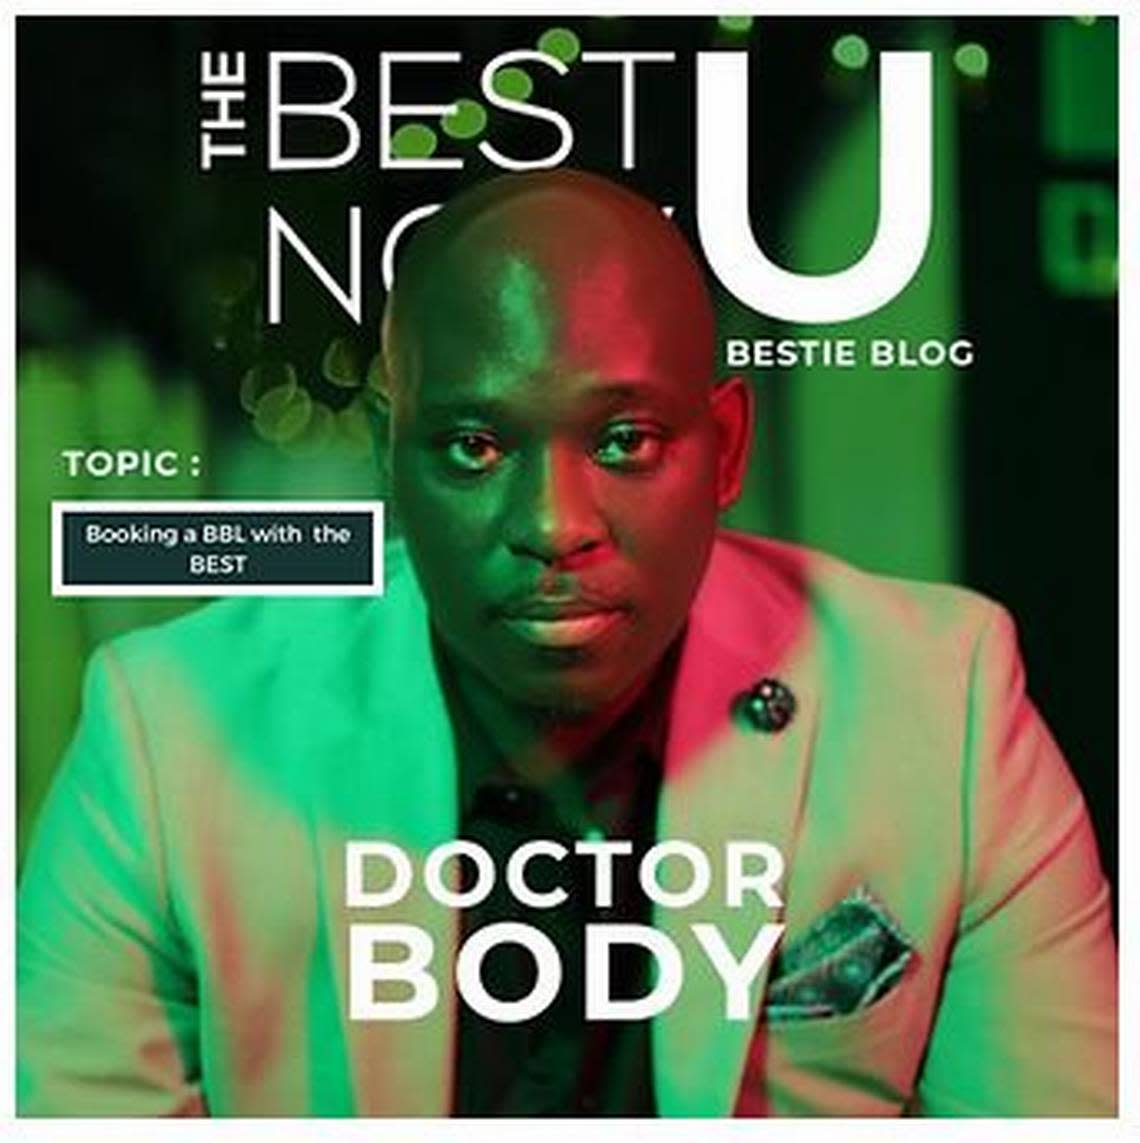 The Best U Now’s website called managing member Dorian Wilkerson, “Doctor Body.” He’s not a licensed medical doctor in Florida.